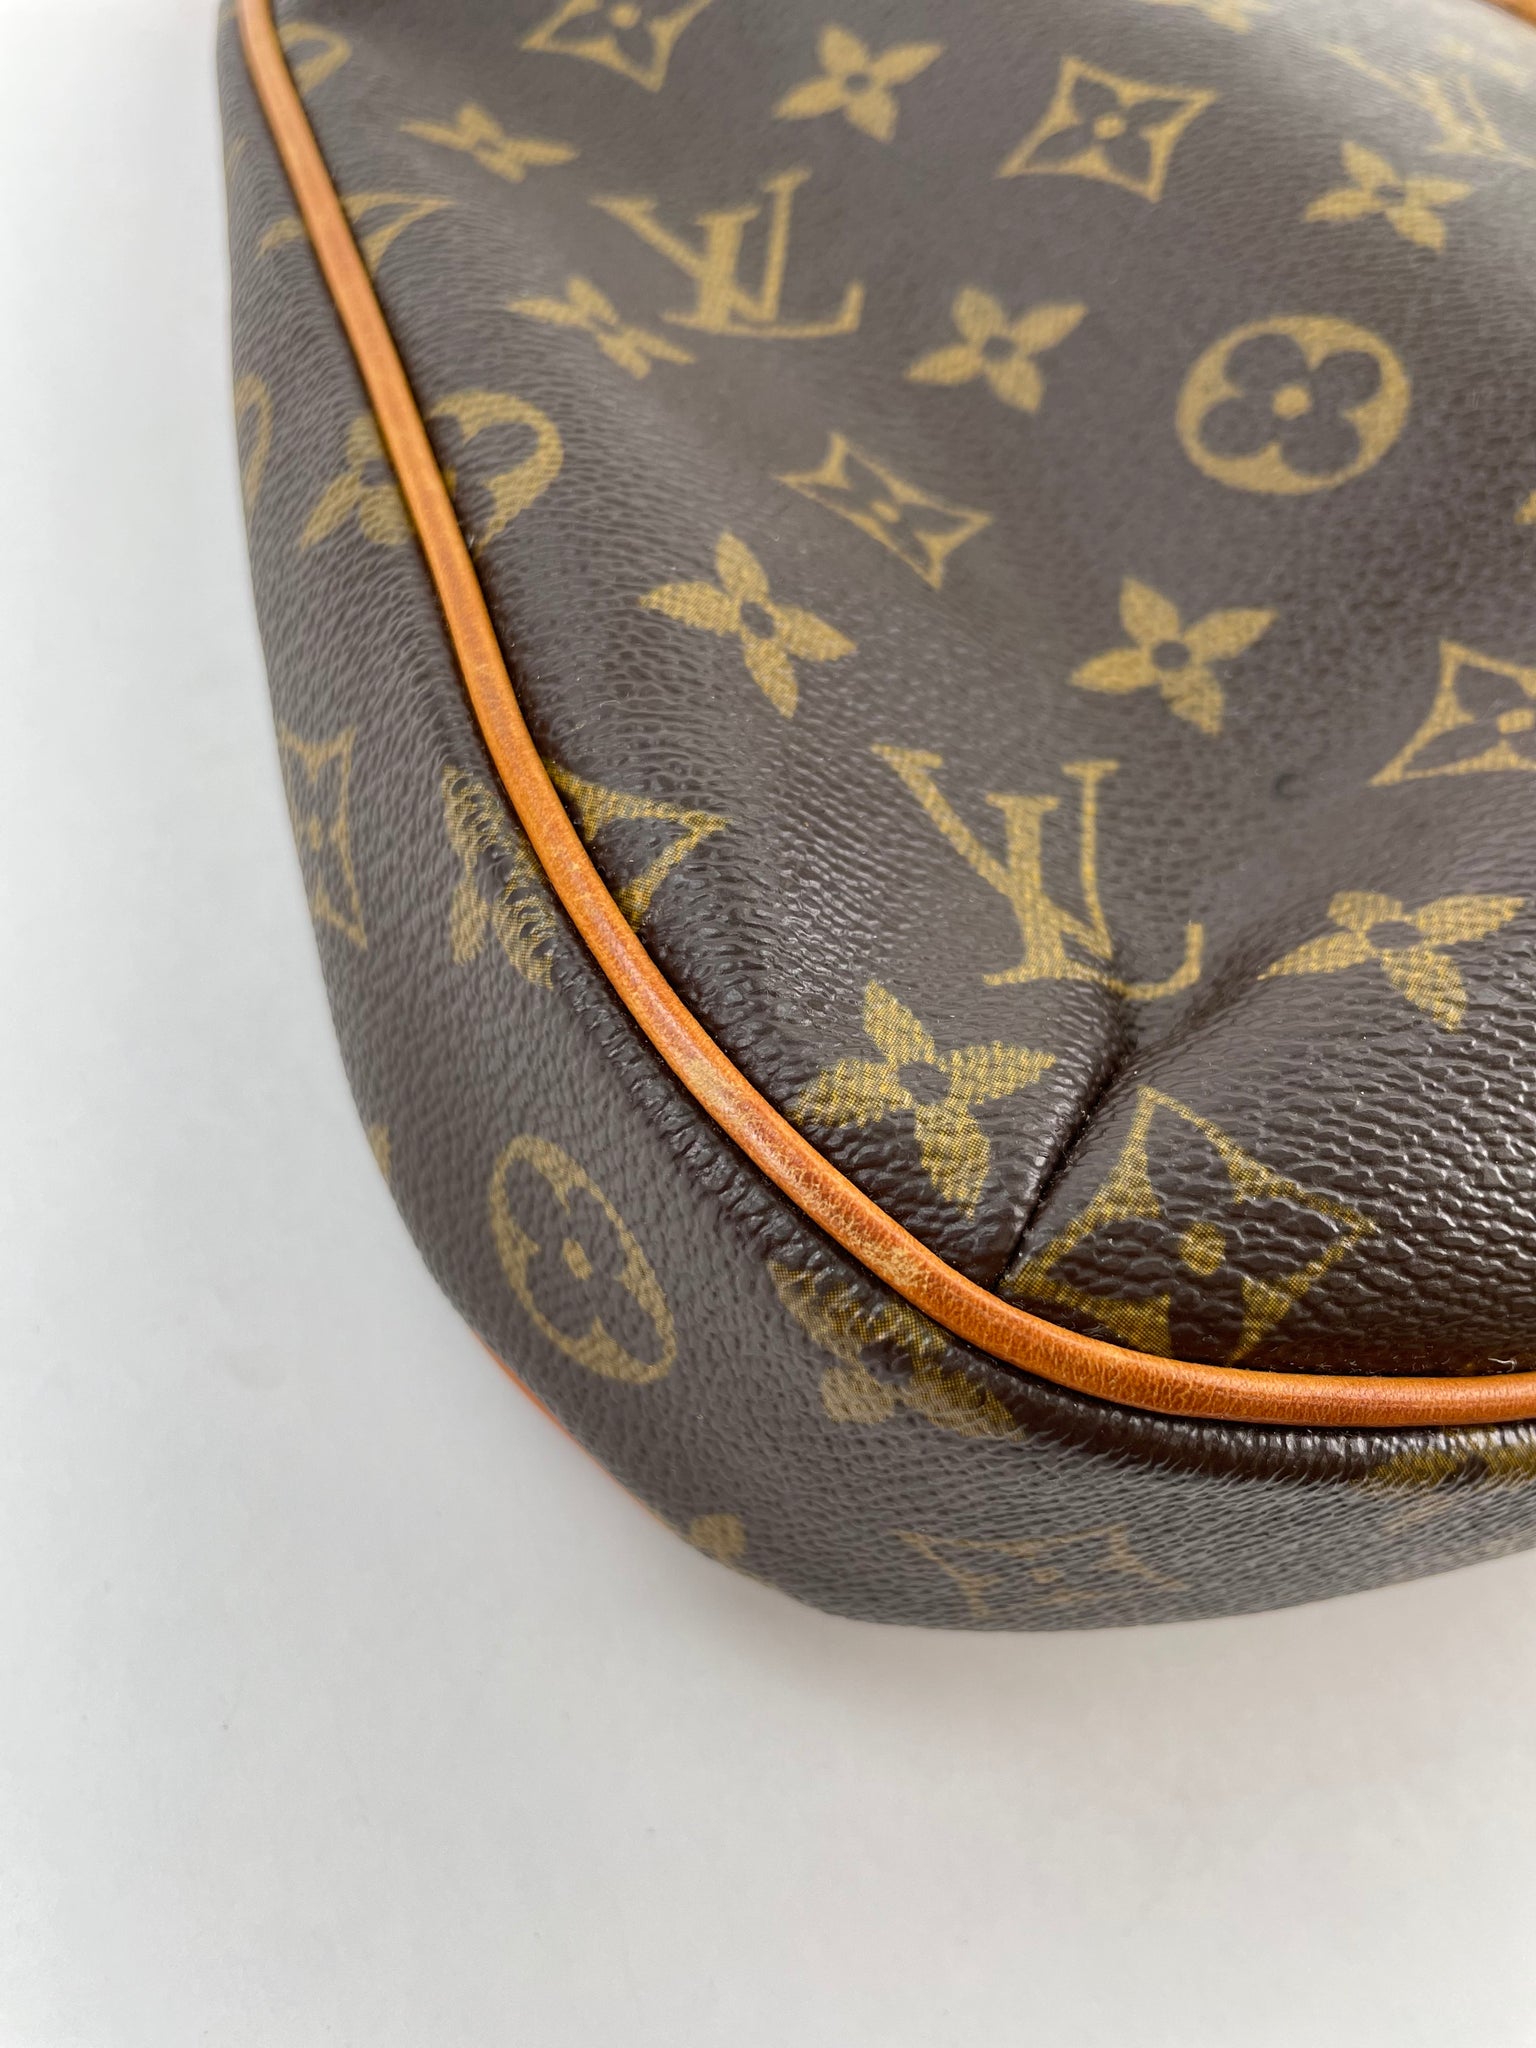 Louis Vuitton Odeon MM Crossbody Bag for Sale in Jefferson, NC